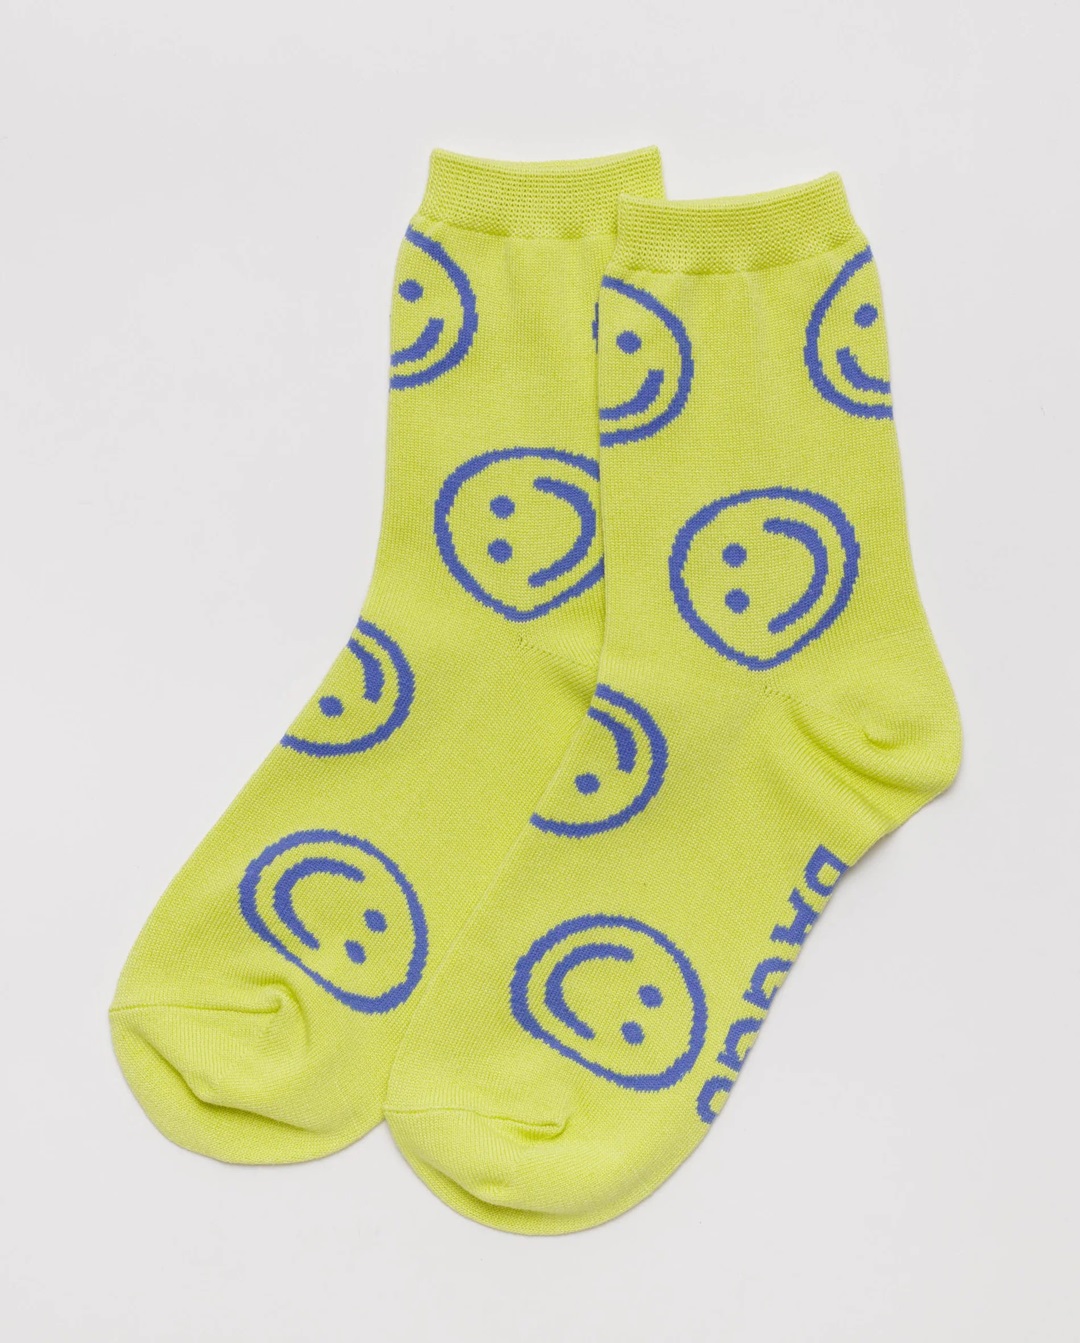 Yellow with blue smiley faces pair of socks